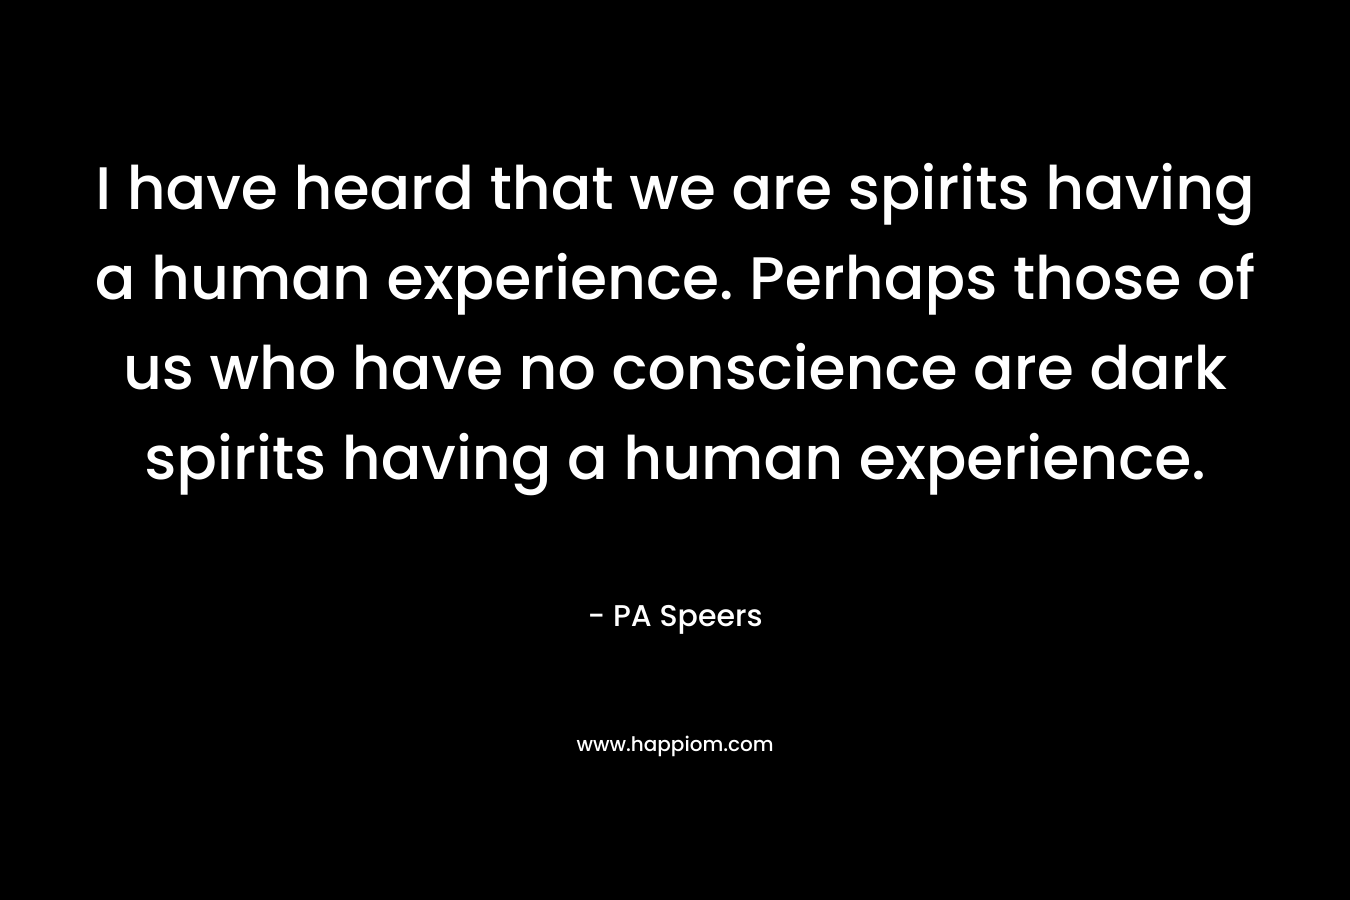 I have heard that we are spirits having a human experience. Perhaps those of us who have no conscience are dark spirits having a human experience.